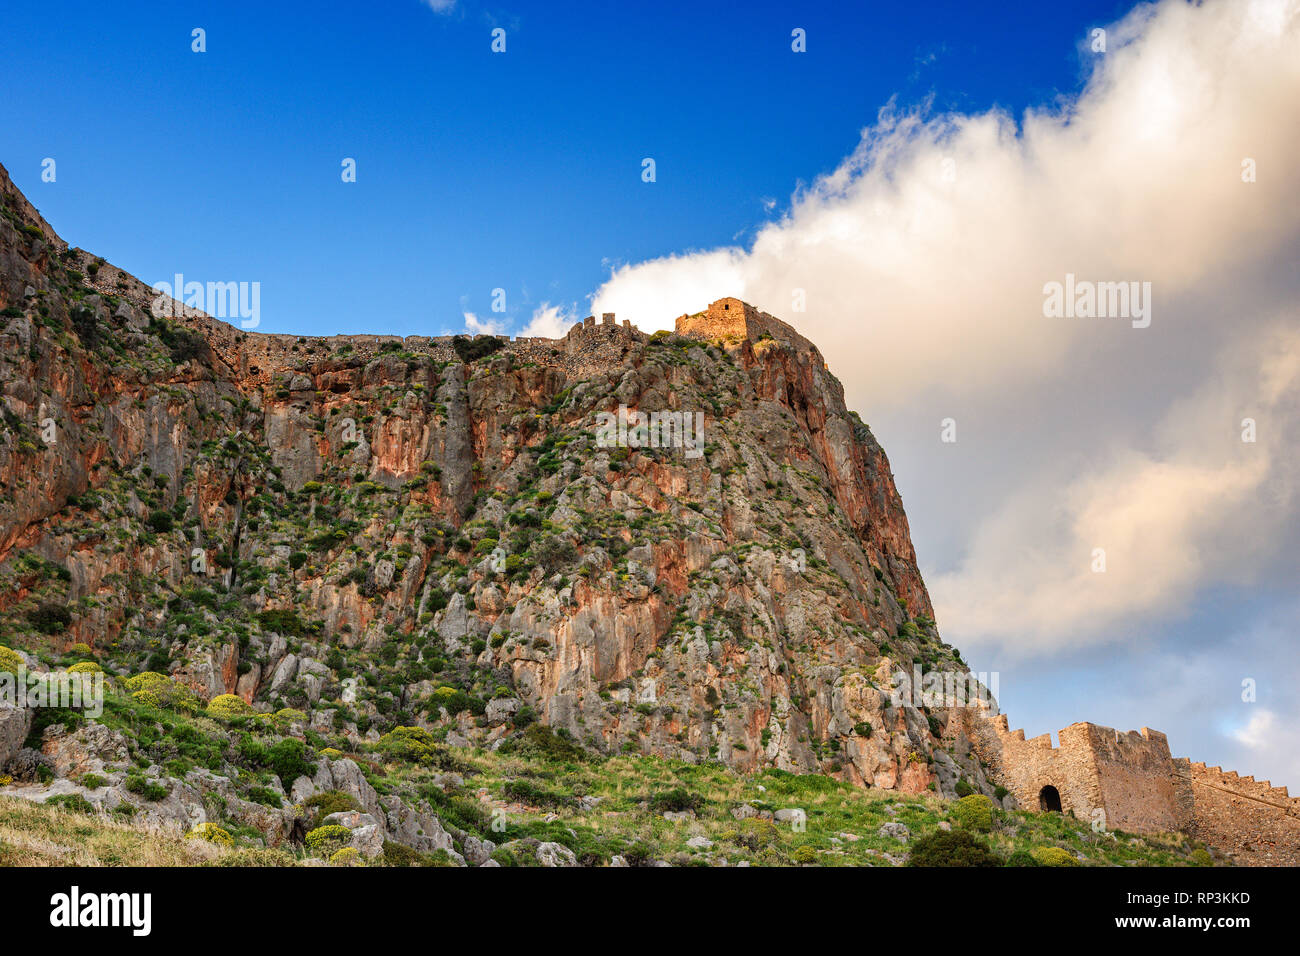 View of the fortress and the walls in Monemvasia, a medieval castle town located in Lakonia, Peloponnese, Greece. Monemvasia Stock Photo